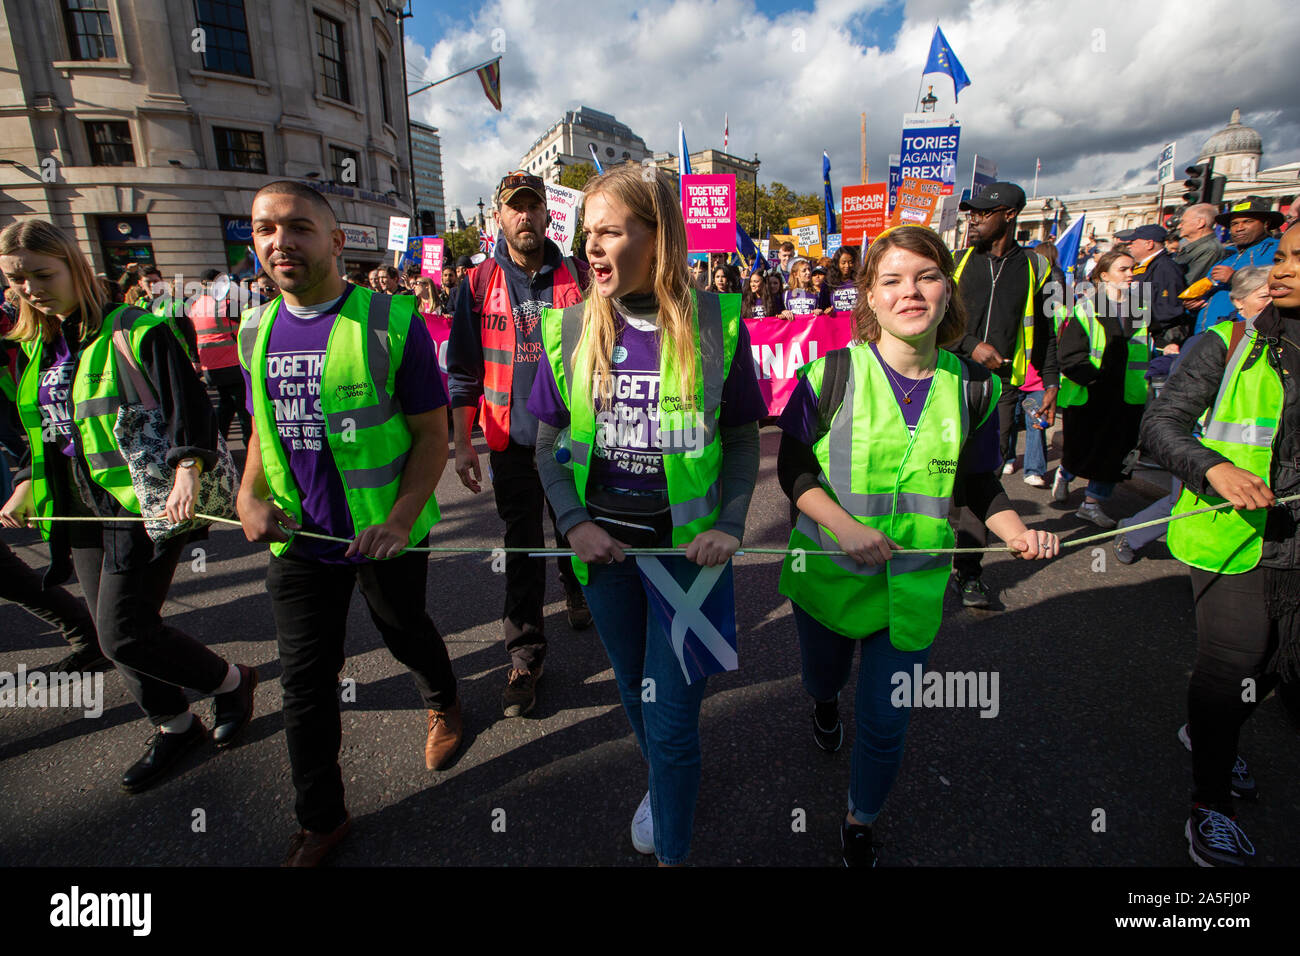 London, England ,19th October 2019; People's Vote March demanding a second referendum on Brexit. Stock Photo